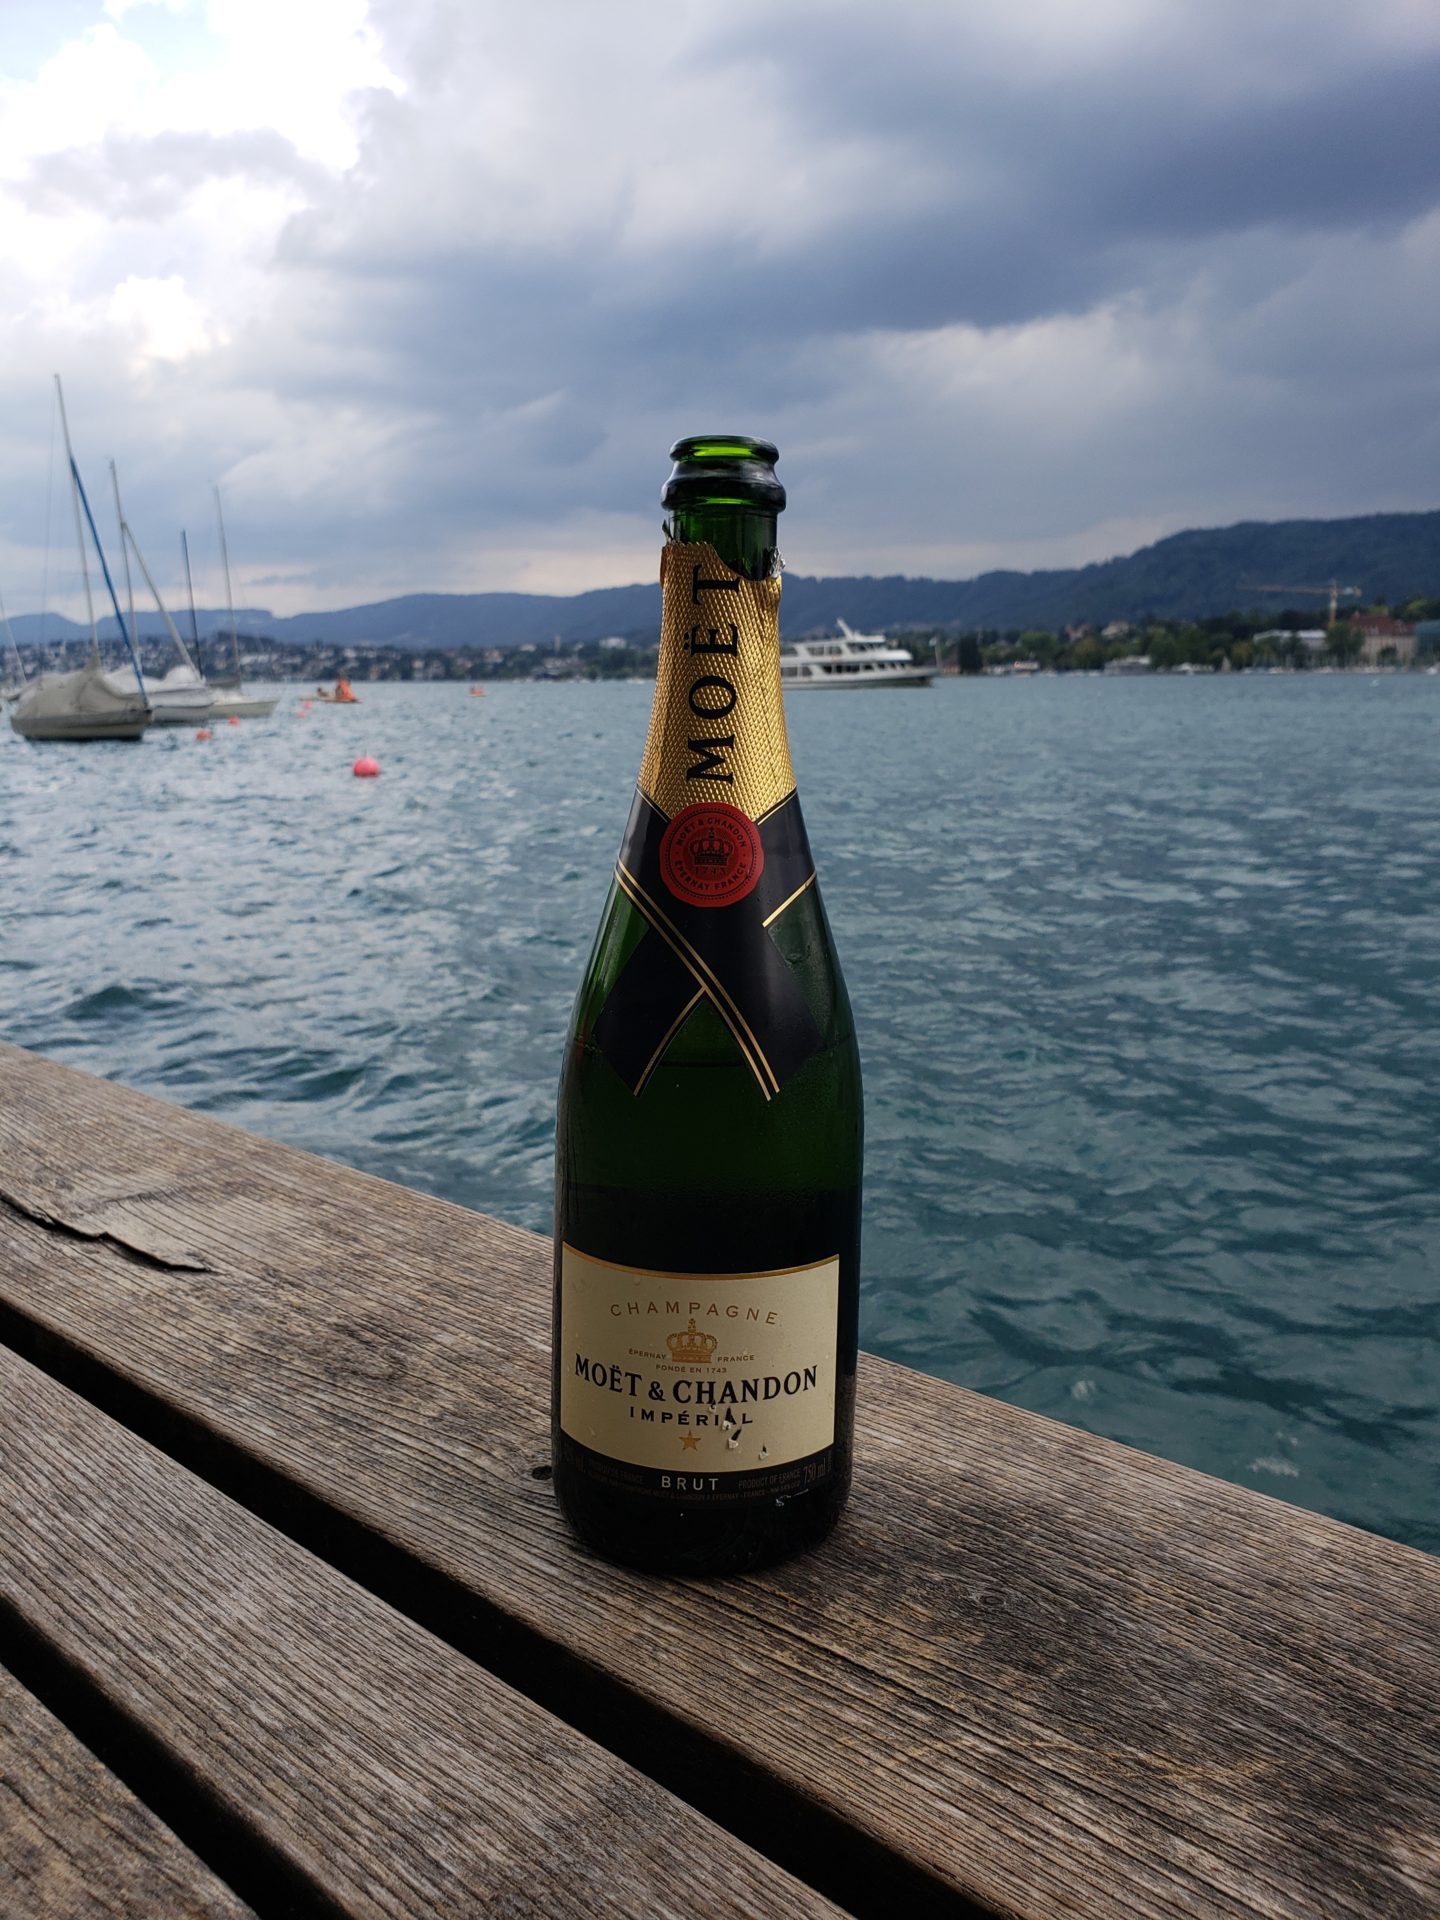 a bottle of champagne on a wood surface with water in the background